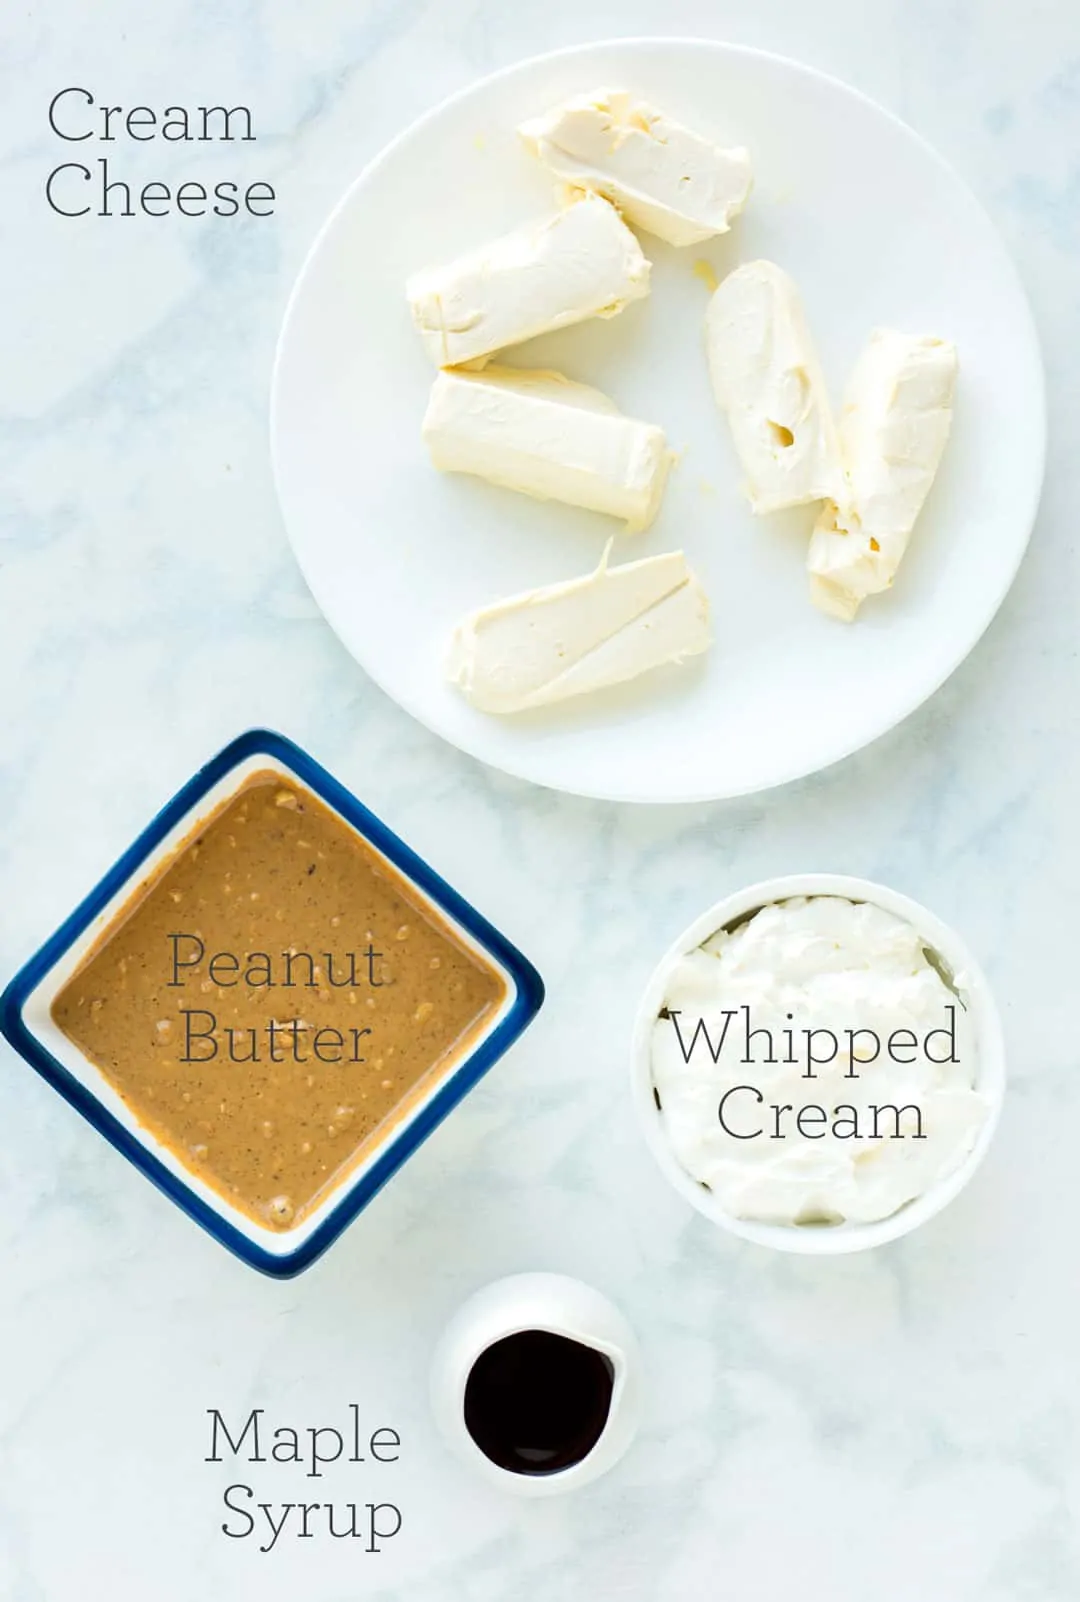 Ingredients to make Peanut Butter Dip with text overlay on each item